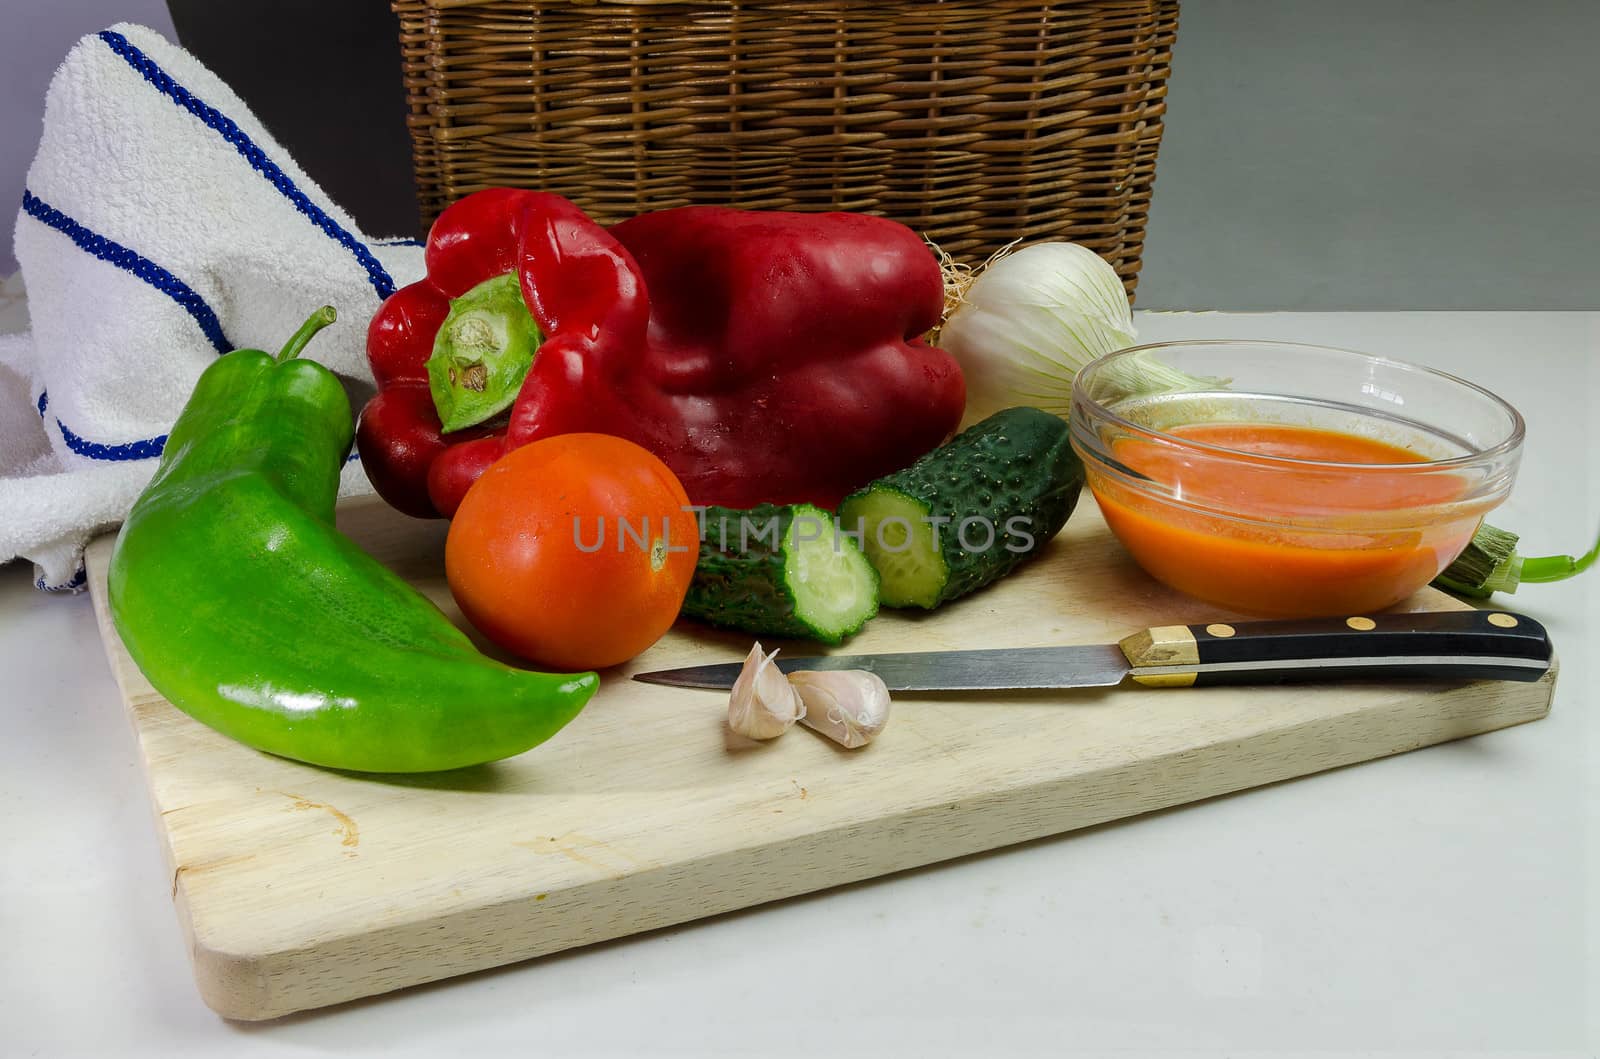 Gazpacho is a cold soup with ingredients such as olive oil, vinegar and raw vegetables: usually tomatoes, cucumbers, peppers, onions and garlic and bread. It is usually served fresh in the hot summer months.